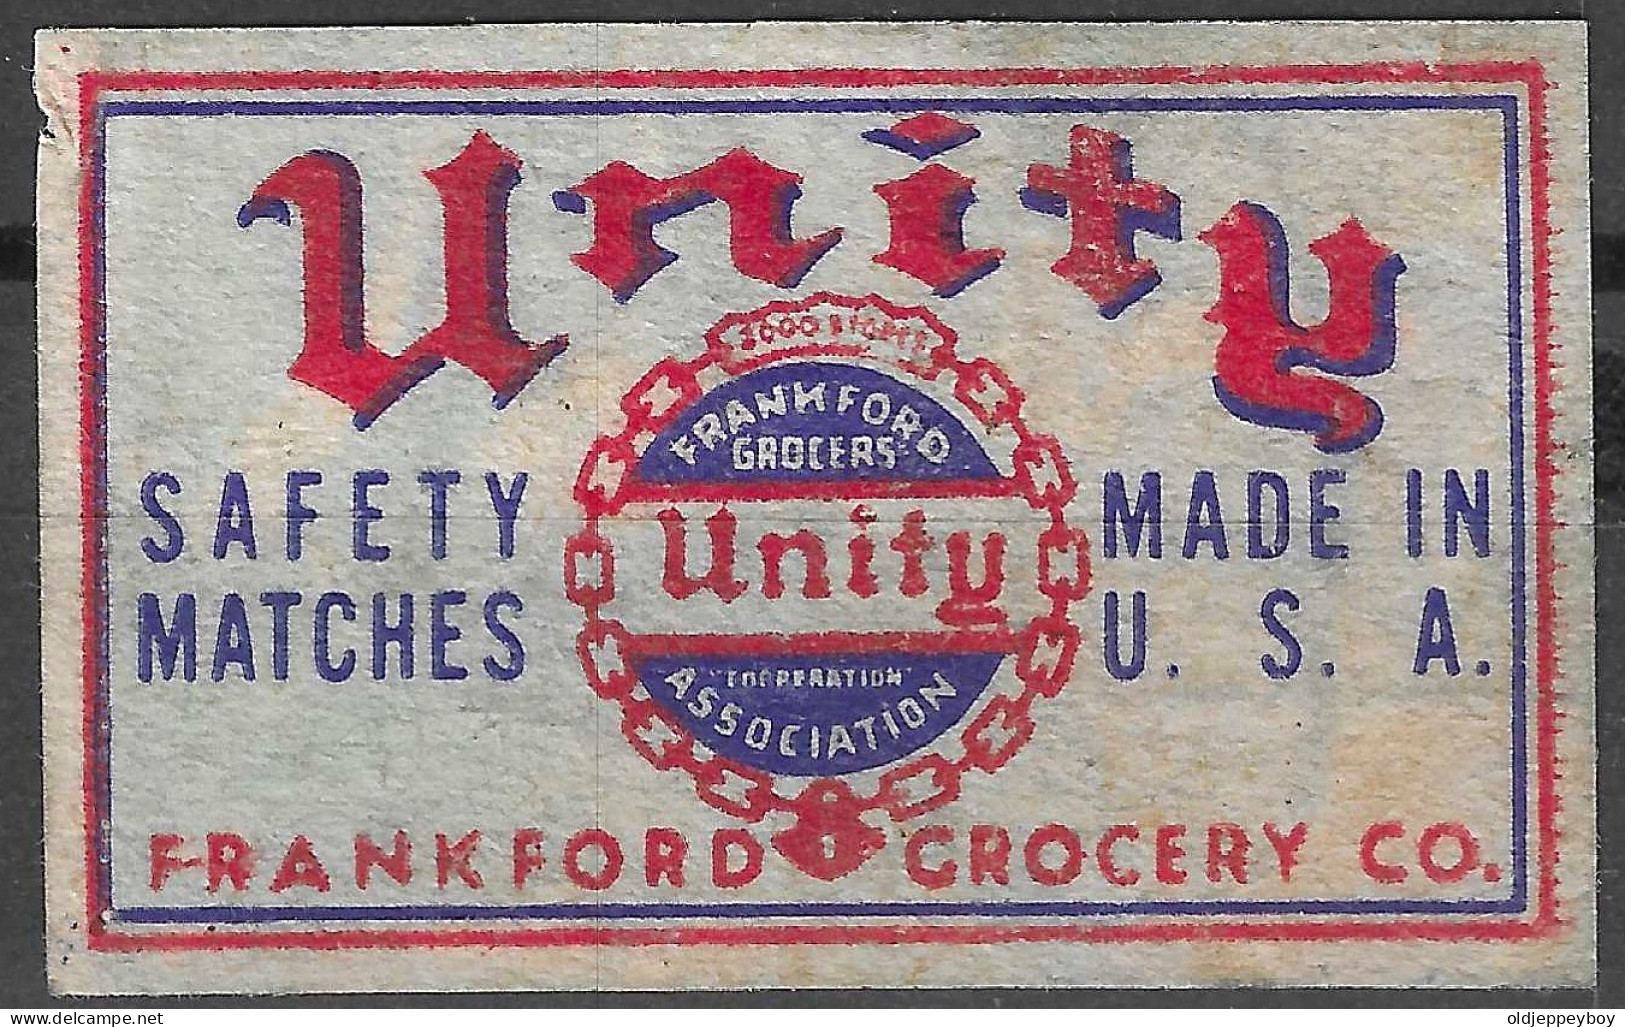  MADE IN U.S.A  Phillumeny MATCHBOX LABEL UNITY FRANKFORD GROCERY CO.  3.5 X 5 CM - Matchbox Labels